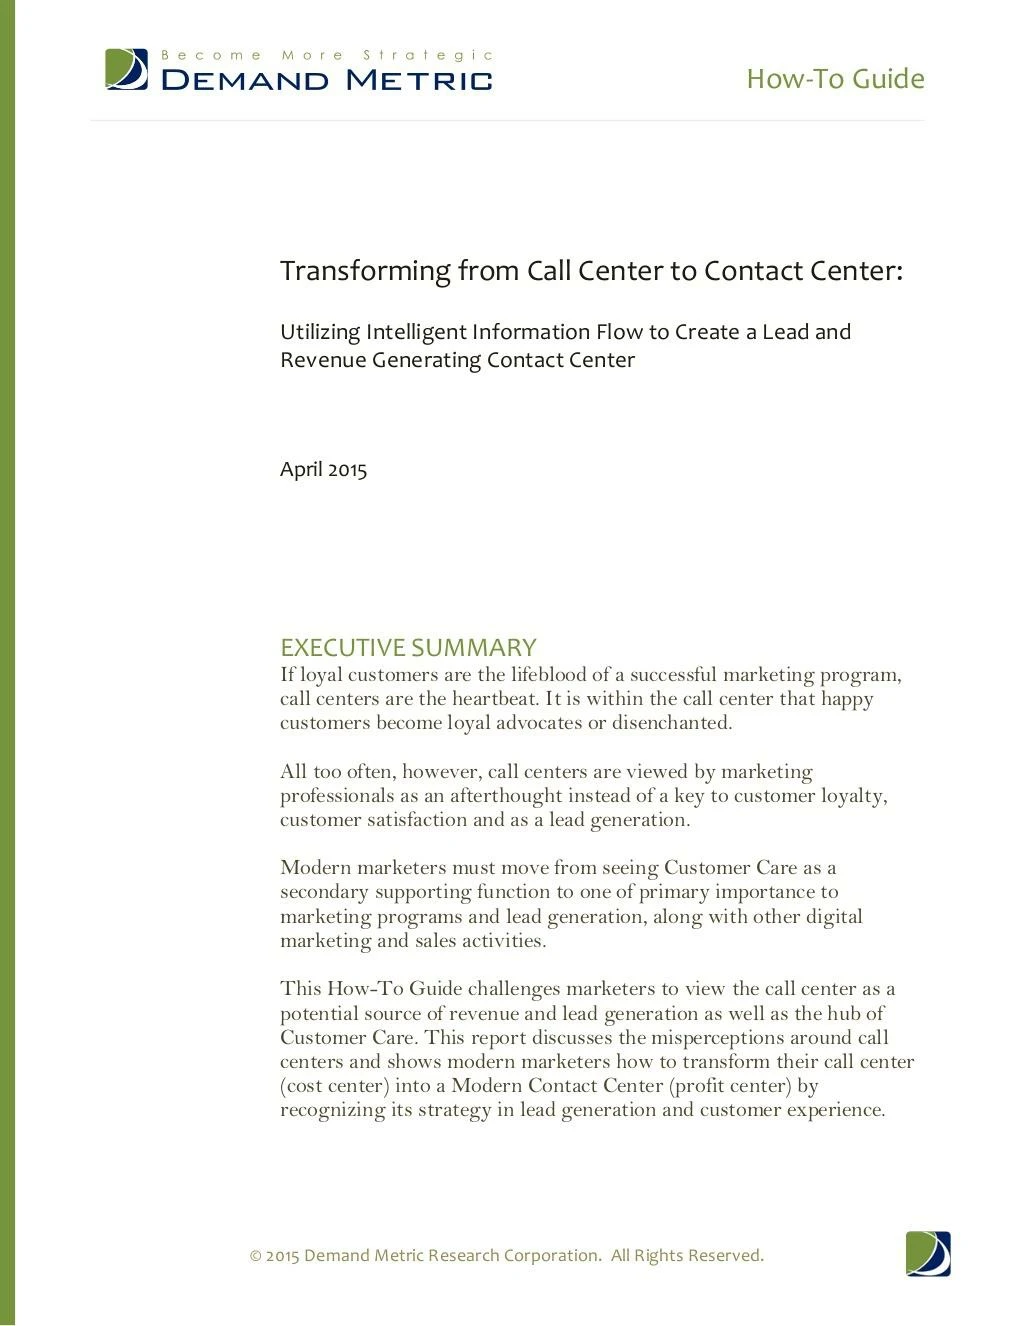 how to guide transforming from call center to contact center